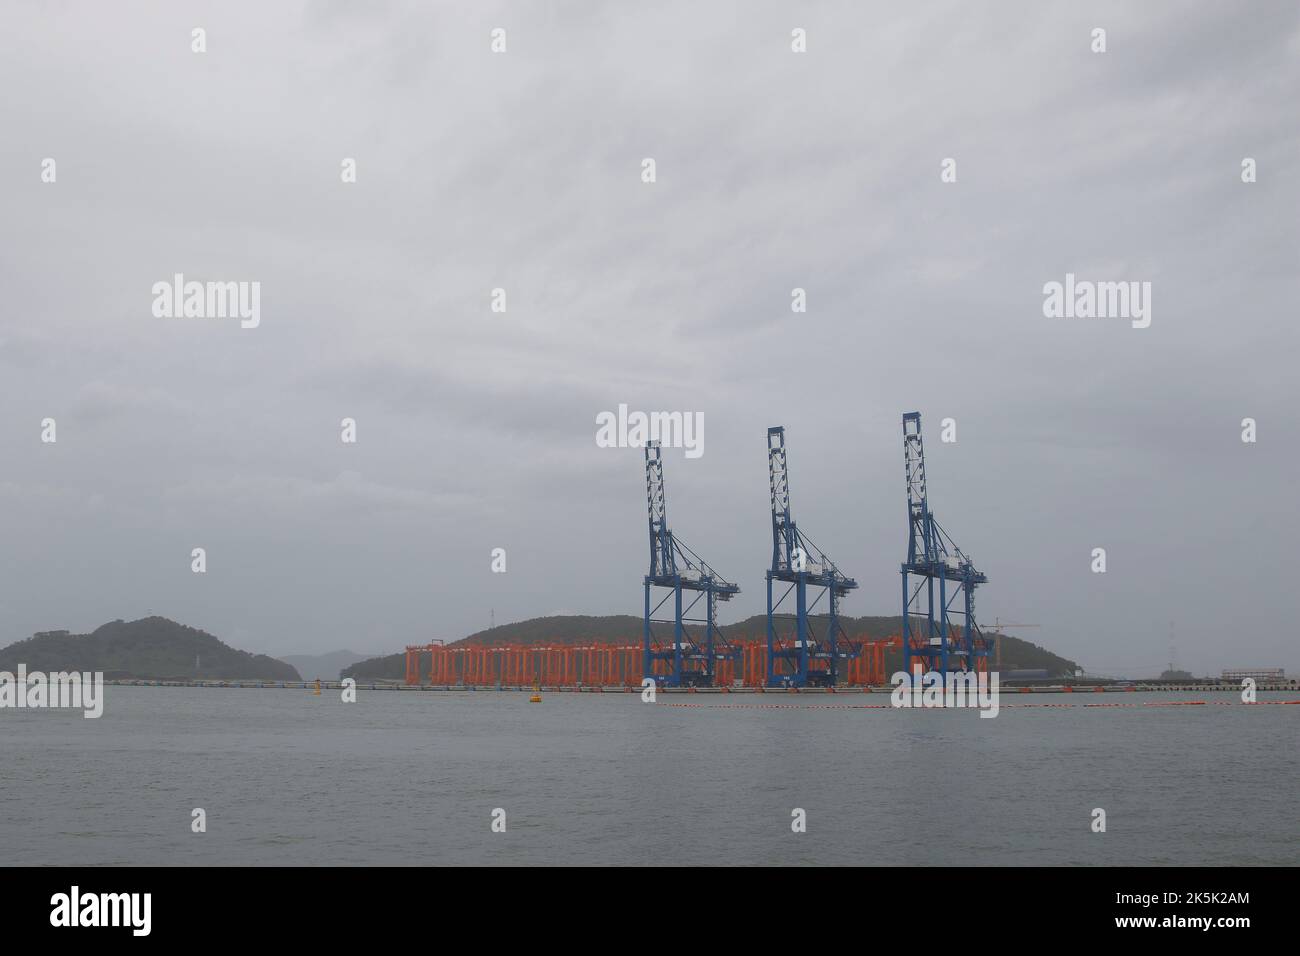 Sep 5, 2022-Busan, South Korea-General view of new port in Busan, South Korea. Super Typhoon Hinnamnor has gradually moved northward to reach waters off the southern island of Jeju on Monday, the state weather agency said, as South Korea braces for what could be the most powerful storm ever to hit the country. Stock Photo